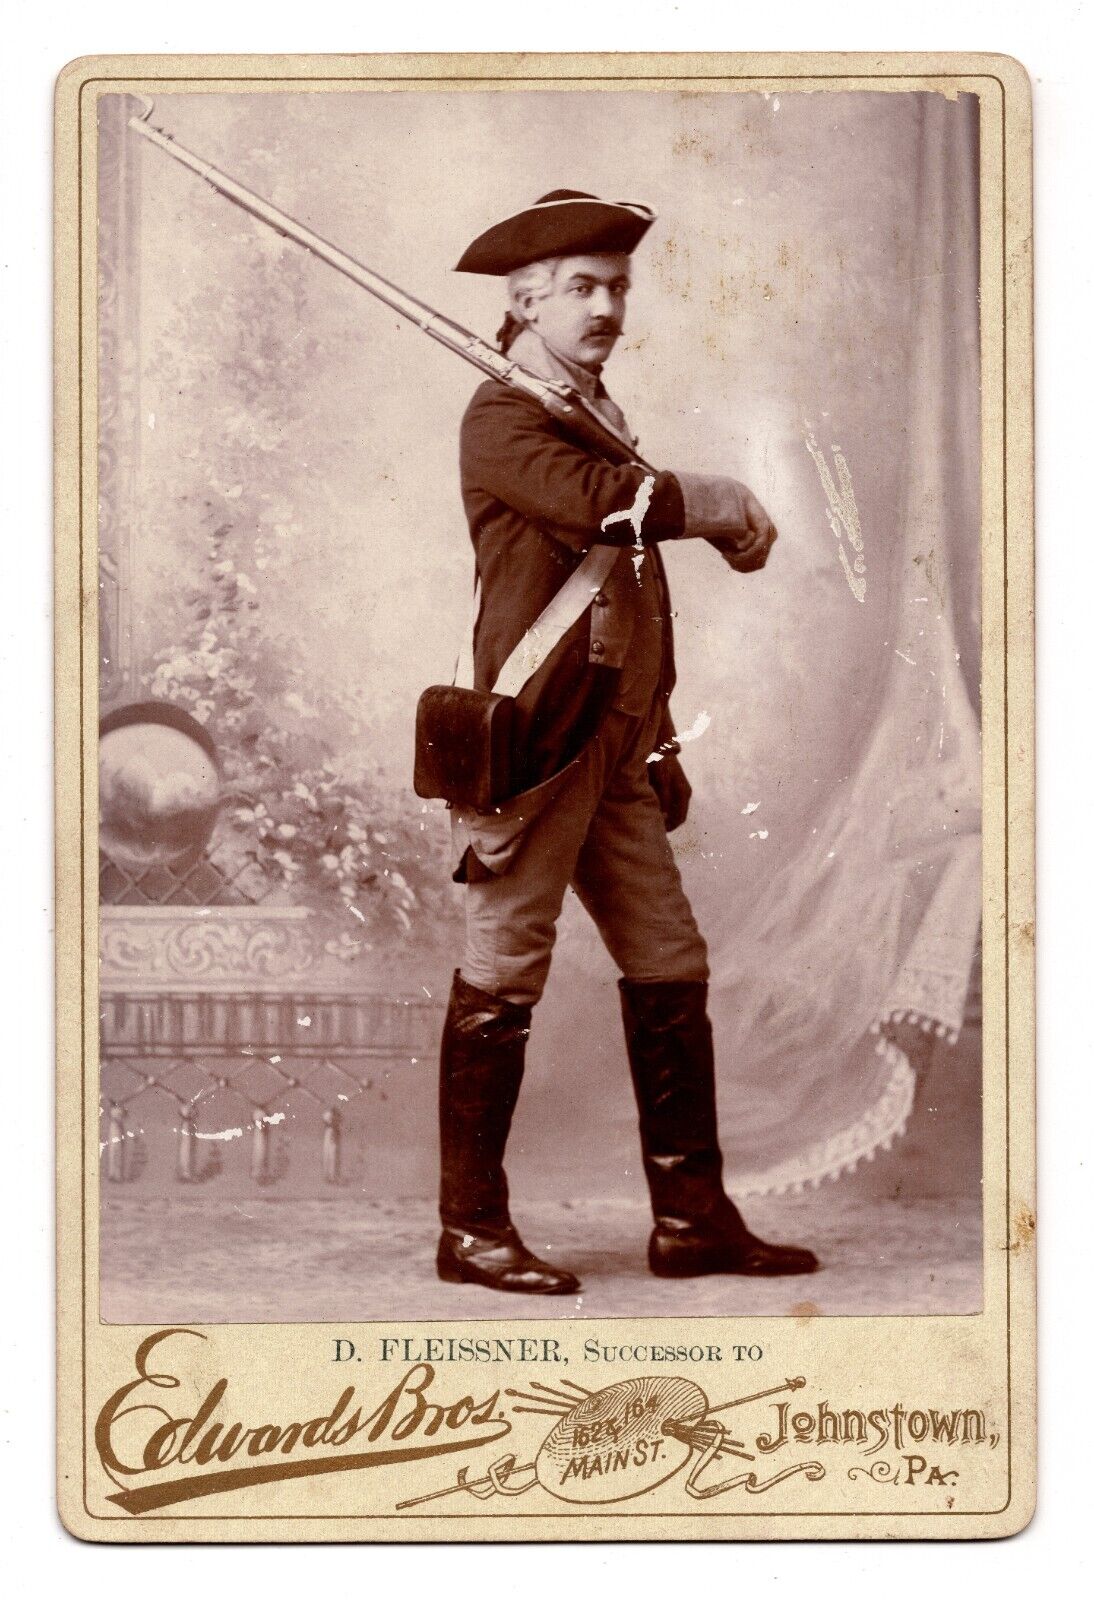 CIRCA 1870s CABINET CARD REVOLUTIONARY WAR MAN HOLDING MUSKET THEATER ACTOR